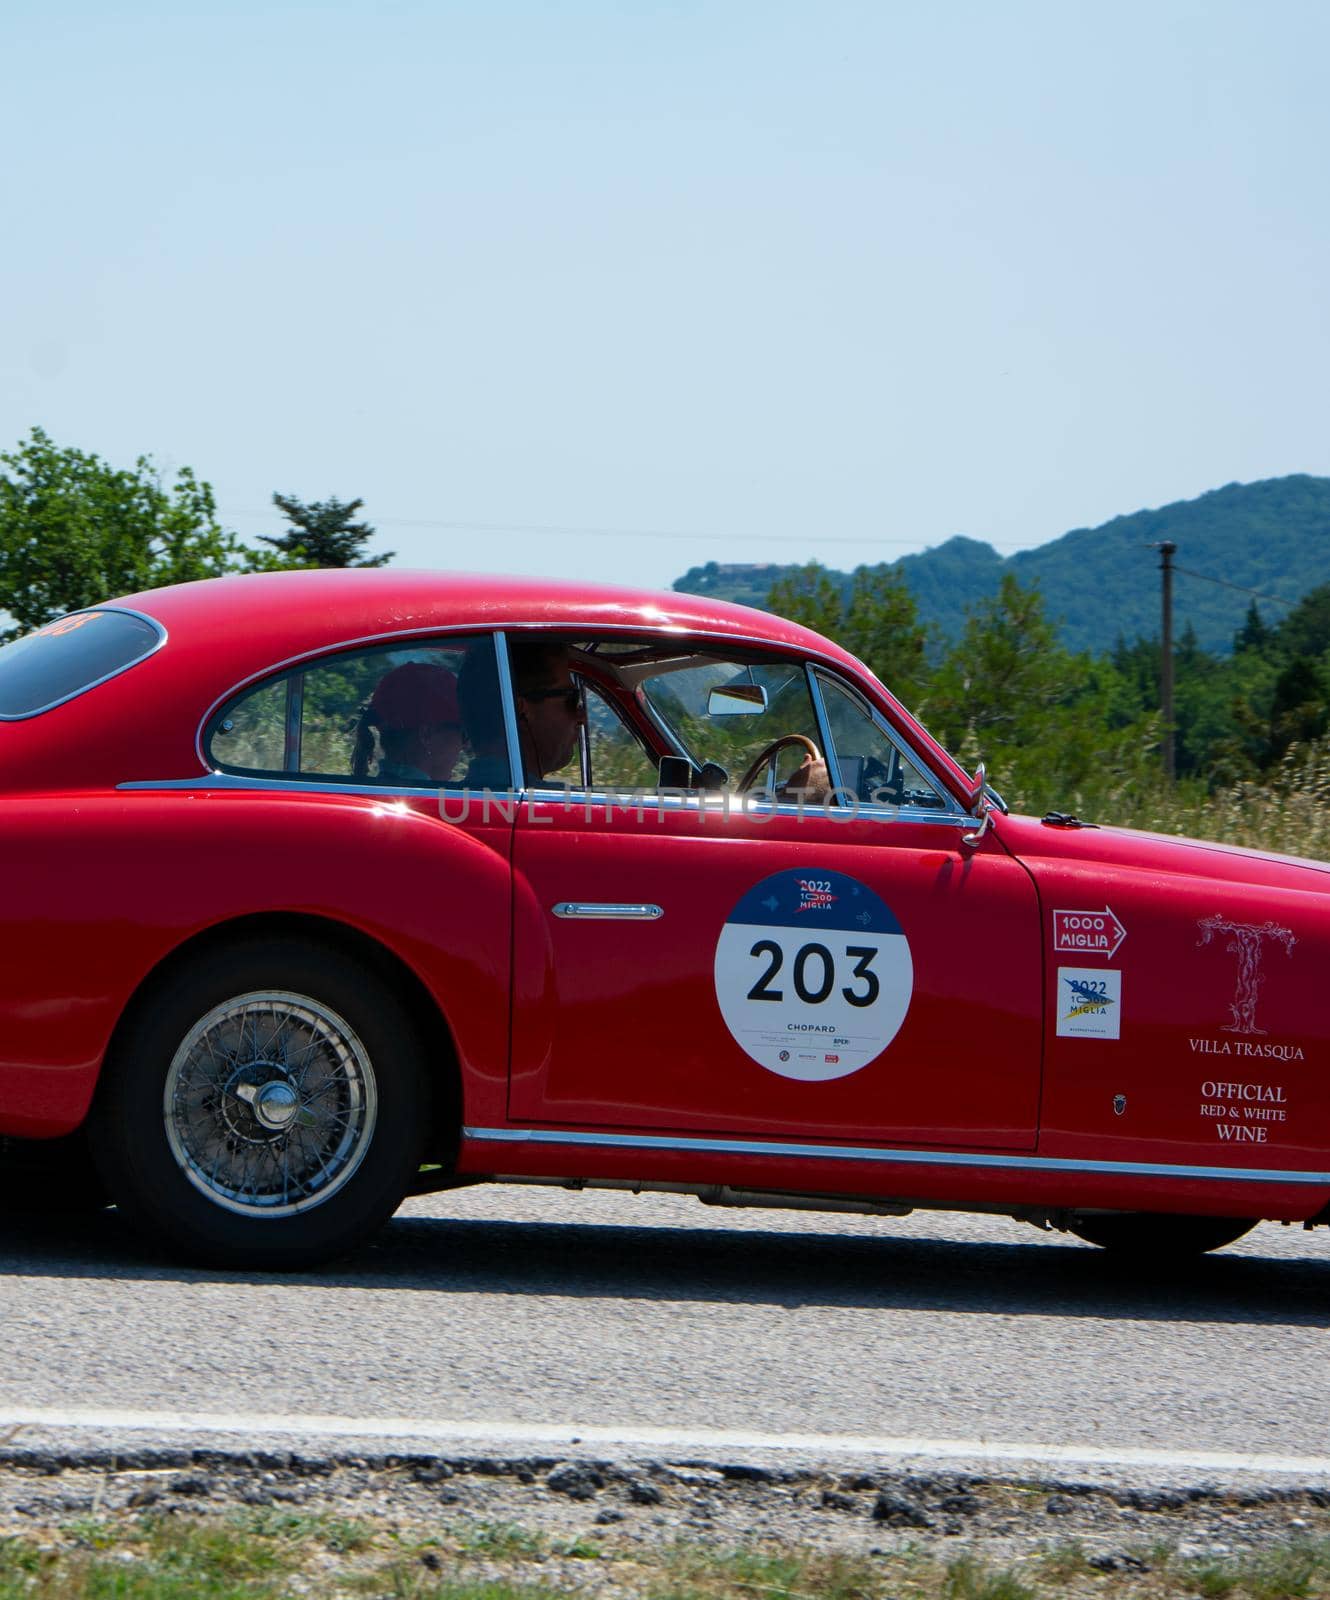 FERRARI 195 INTER COUPE GHIA 1951 on an old racing car in rally Mille Miglia 2022 the famous italian historical race (1927-1957 by massimocampanari